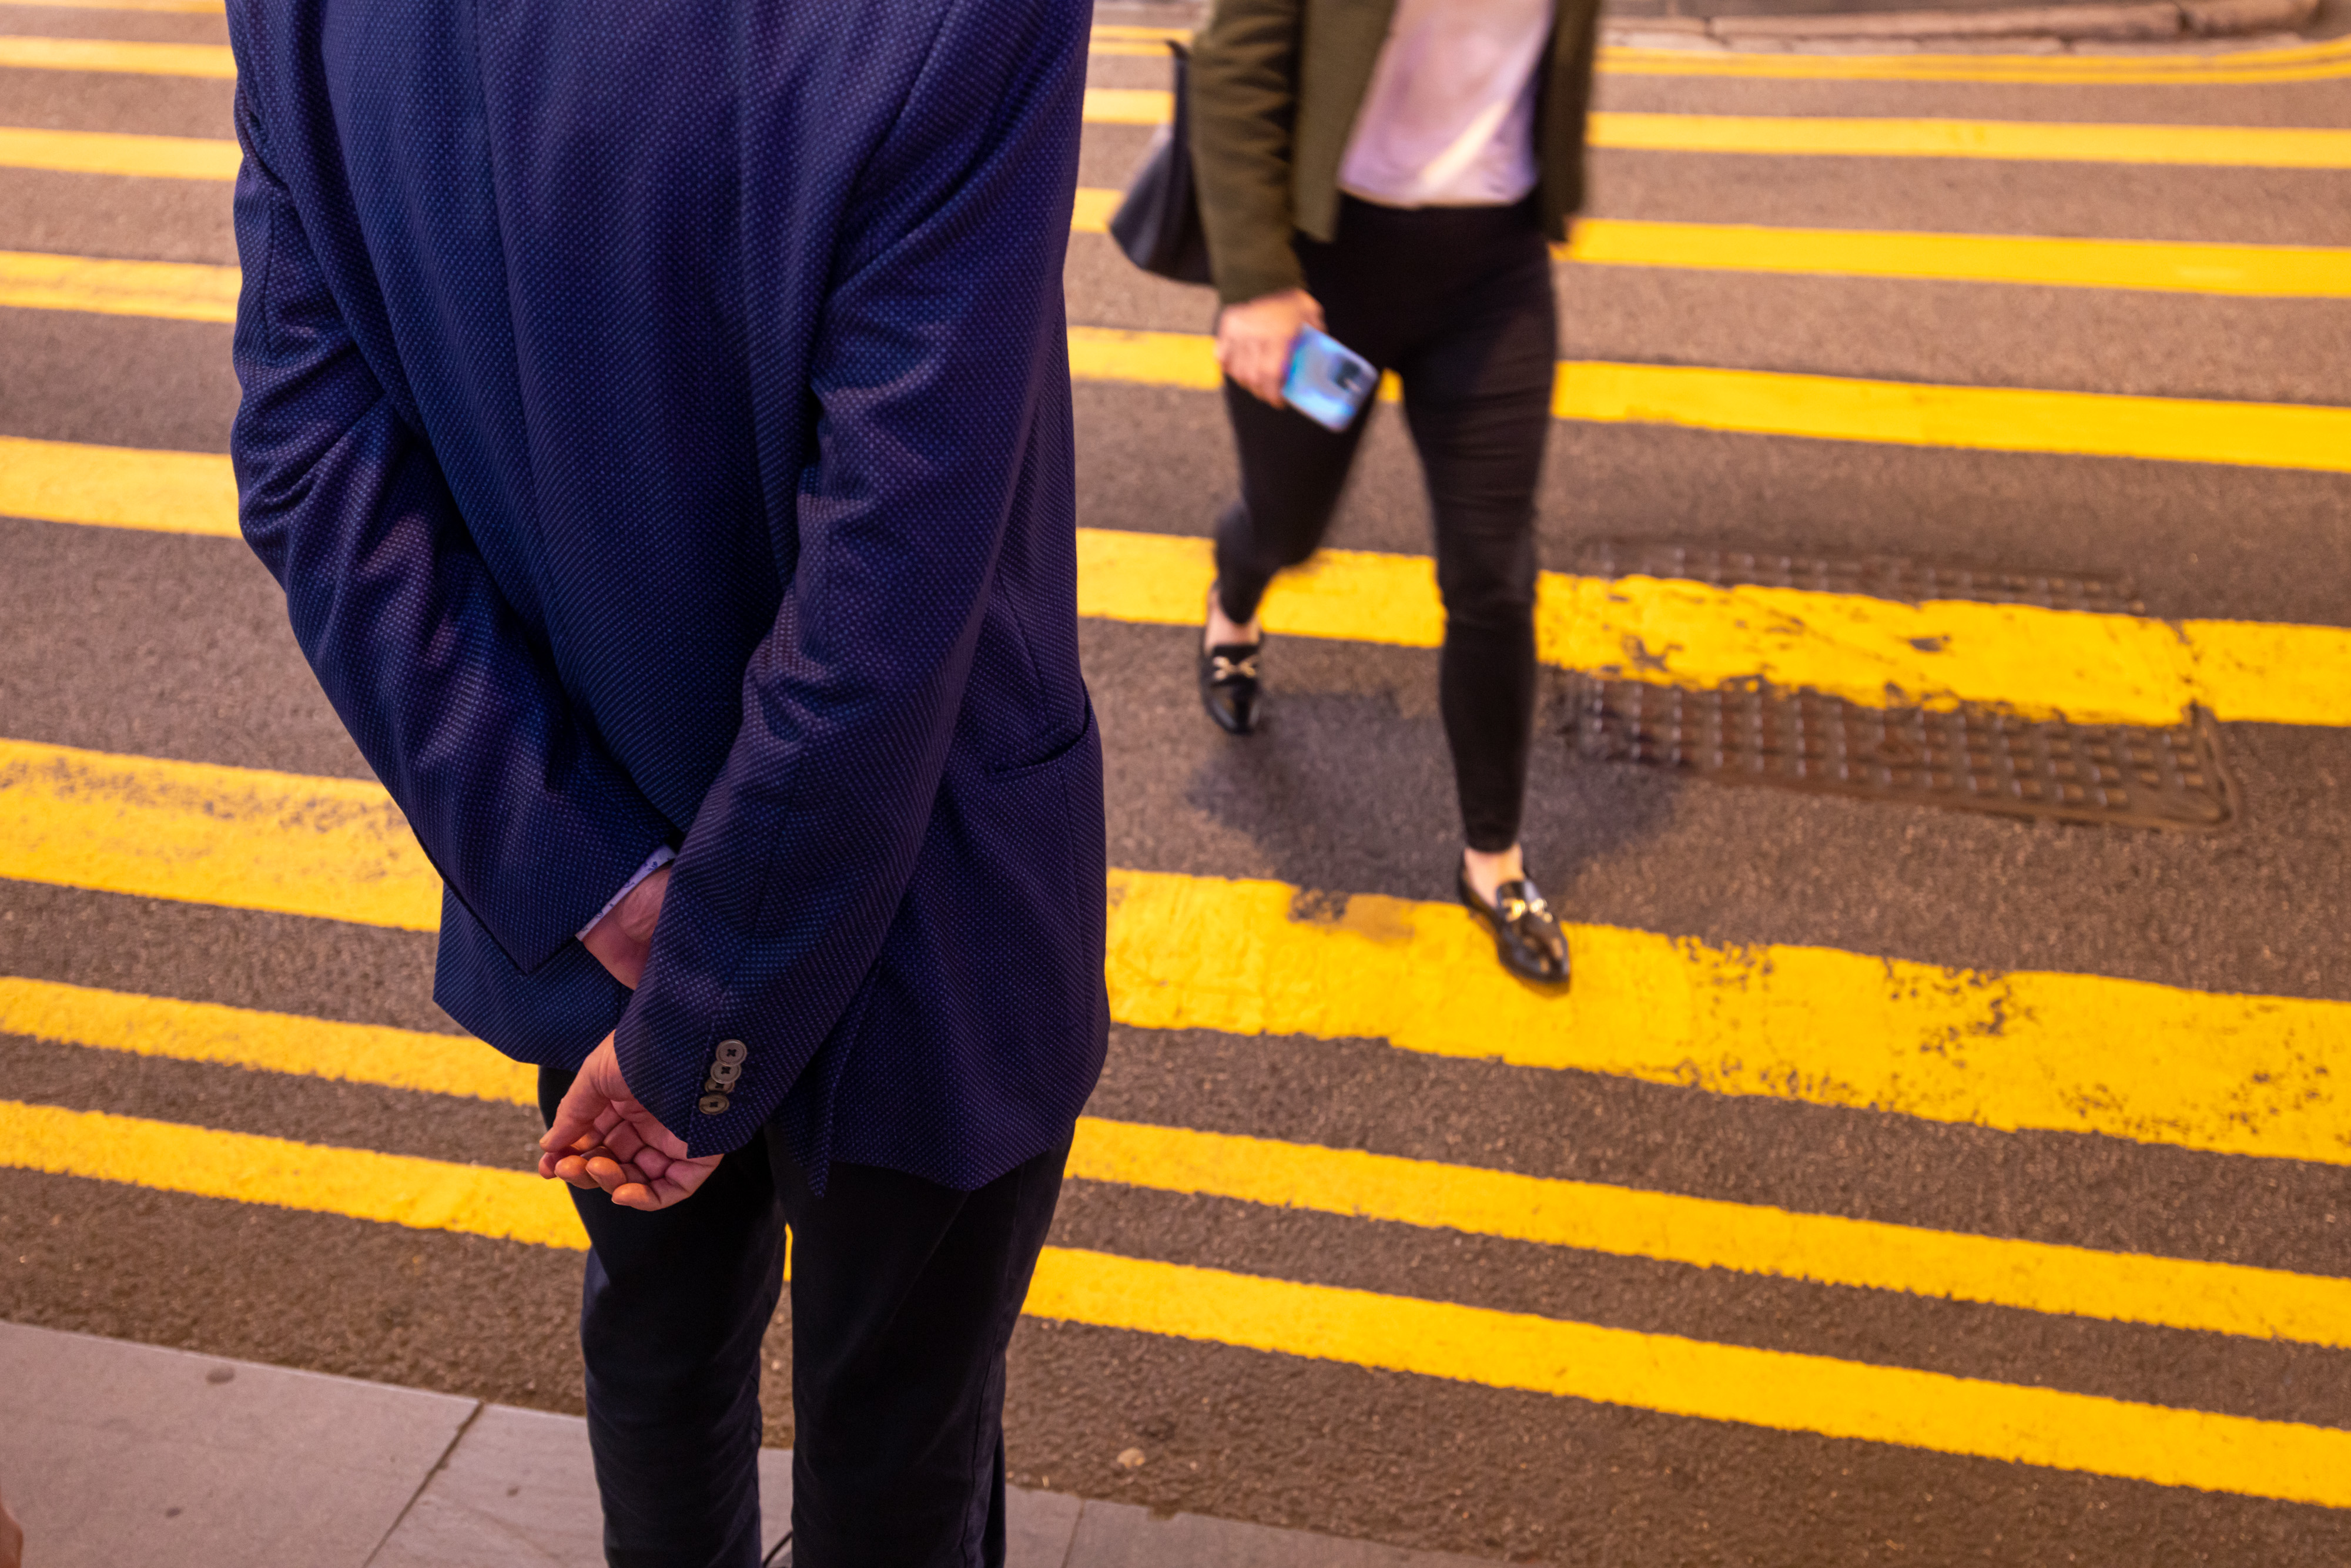 Pedestrians cross a street in Hong Kong’s Central district on Nov. 20. Photo: Bloomberg